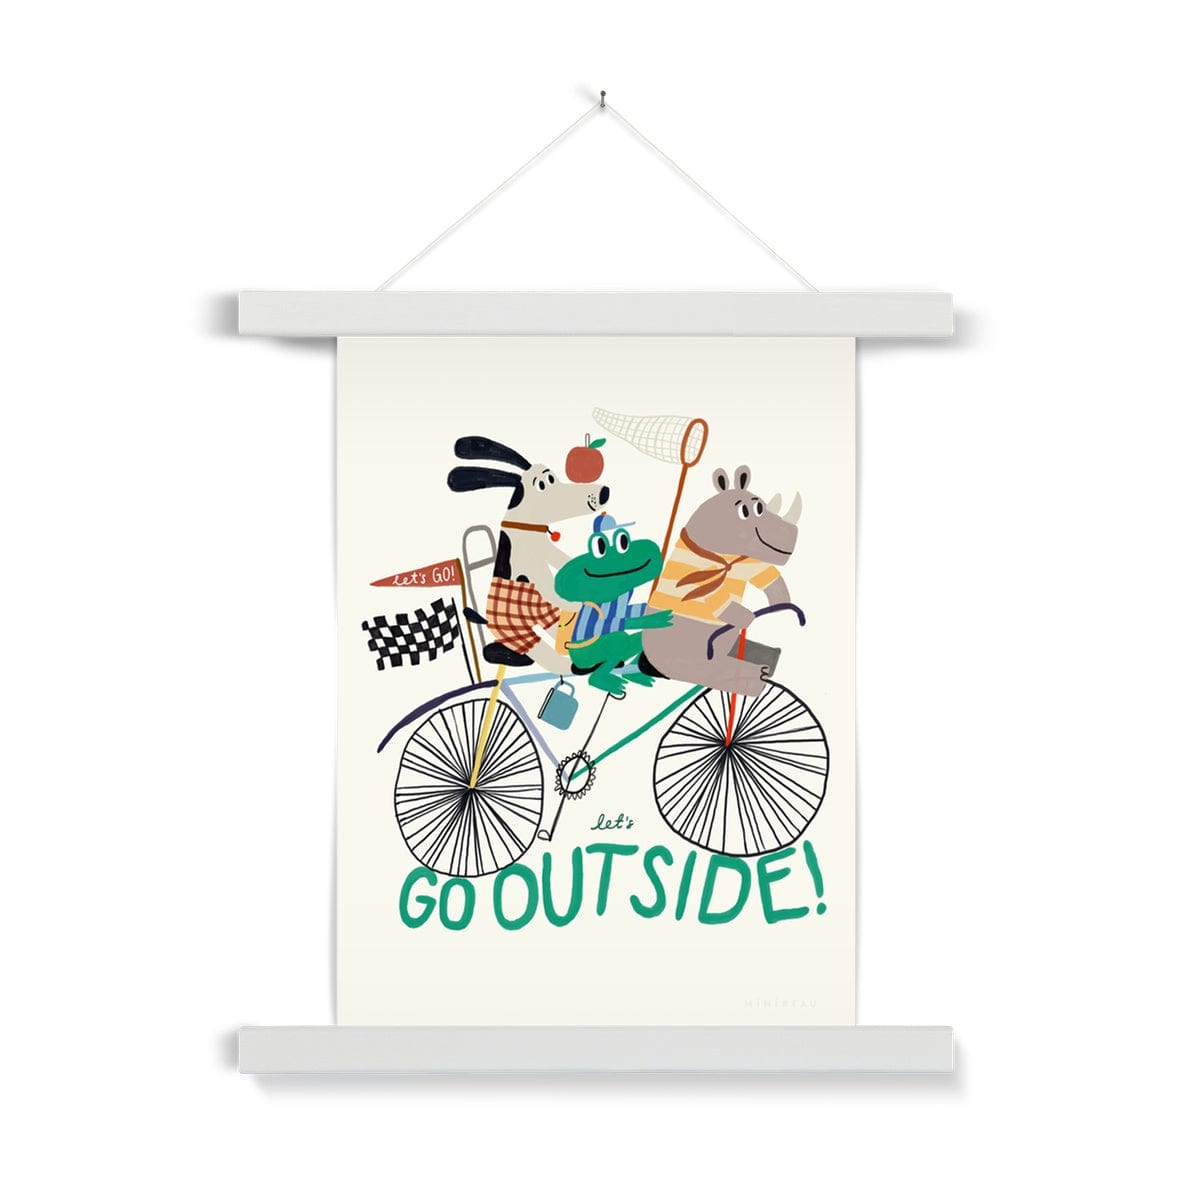 A photo of our let's go outside art print on a white background. Featuring a Rhino in a yellow striped top at the front, a frog in a blue striped top and matching baseball cap holding a net in the middle, and a dog in chequered shorts at the back with a red apple balanced on his nose all on a multi coloured bike above the words let's go outside. On a cream background. In a white wooden hanger